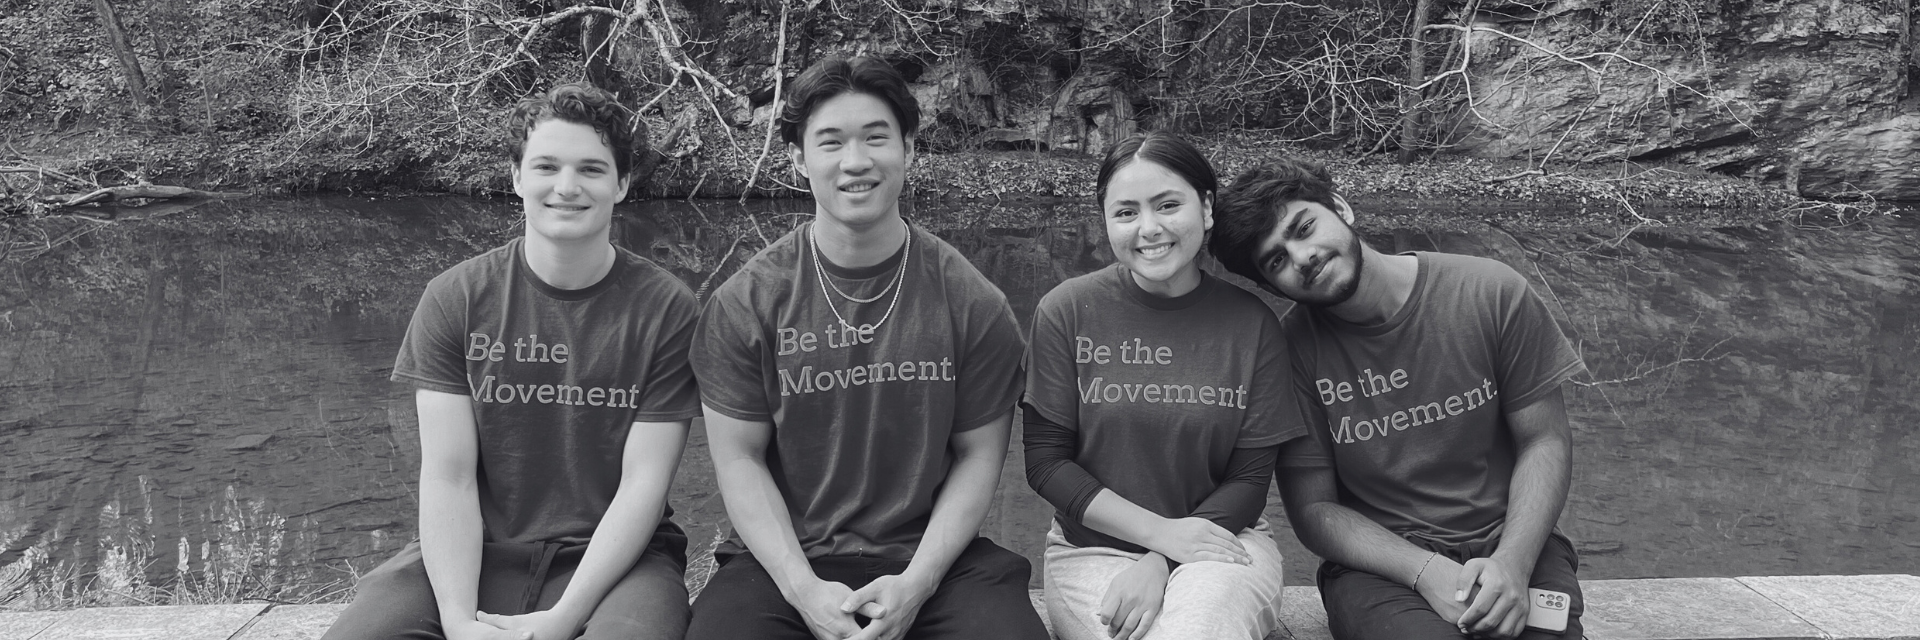 Four Alternative Break Volunteers taking a photo together. Their shirts say "Be The Movement."